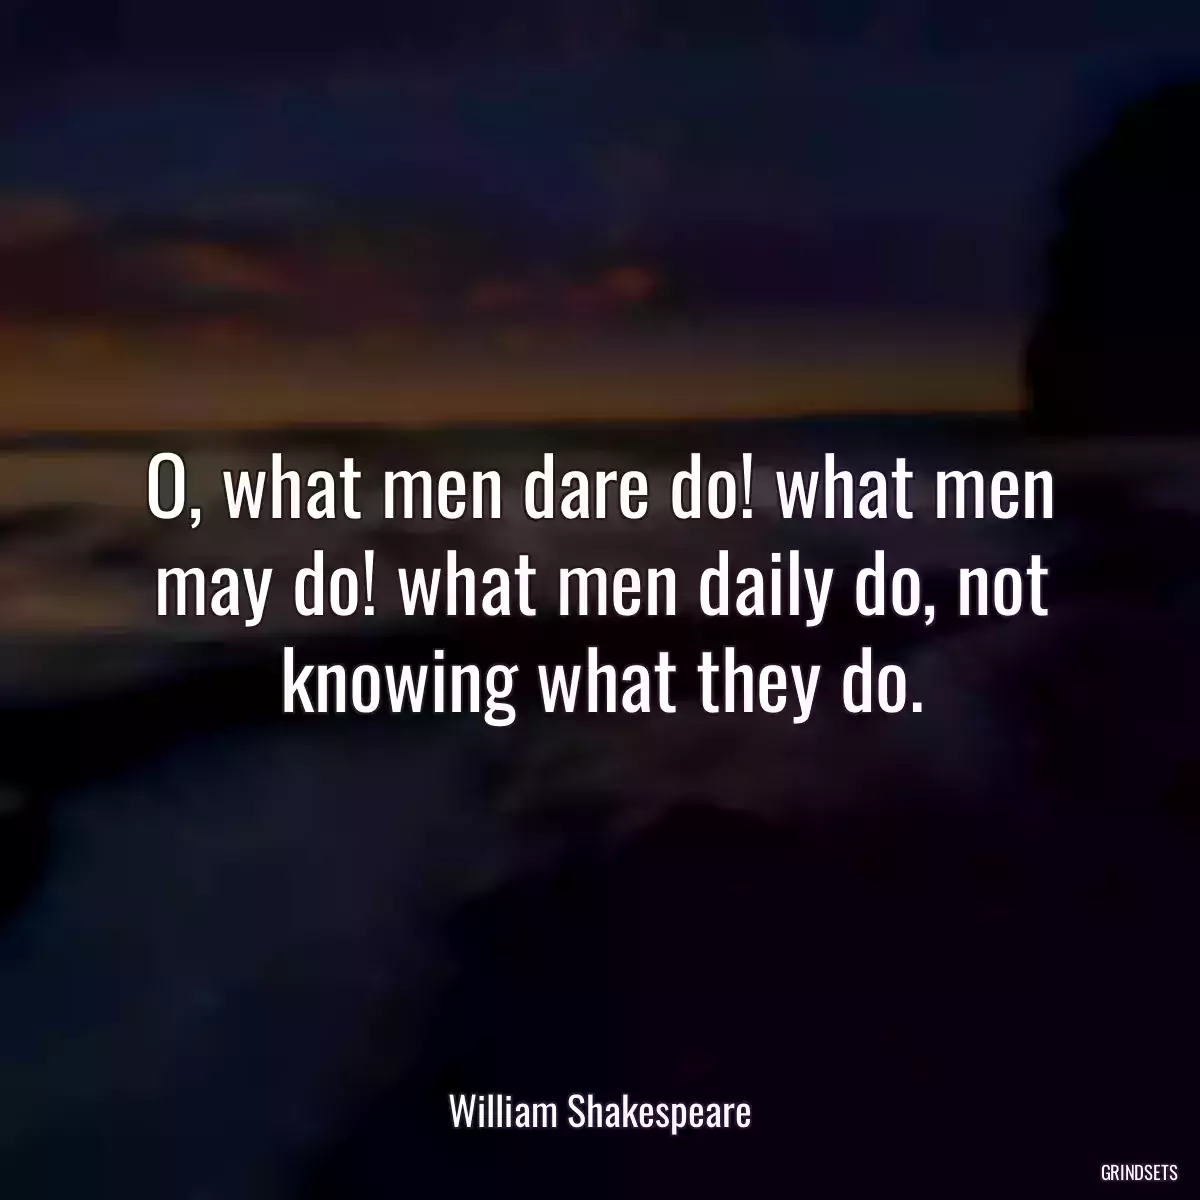 O, what men dare do! what men may do! what men daily do, not knowing what they do.